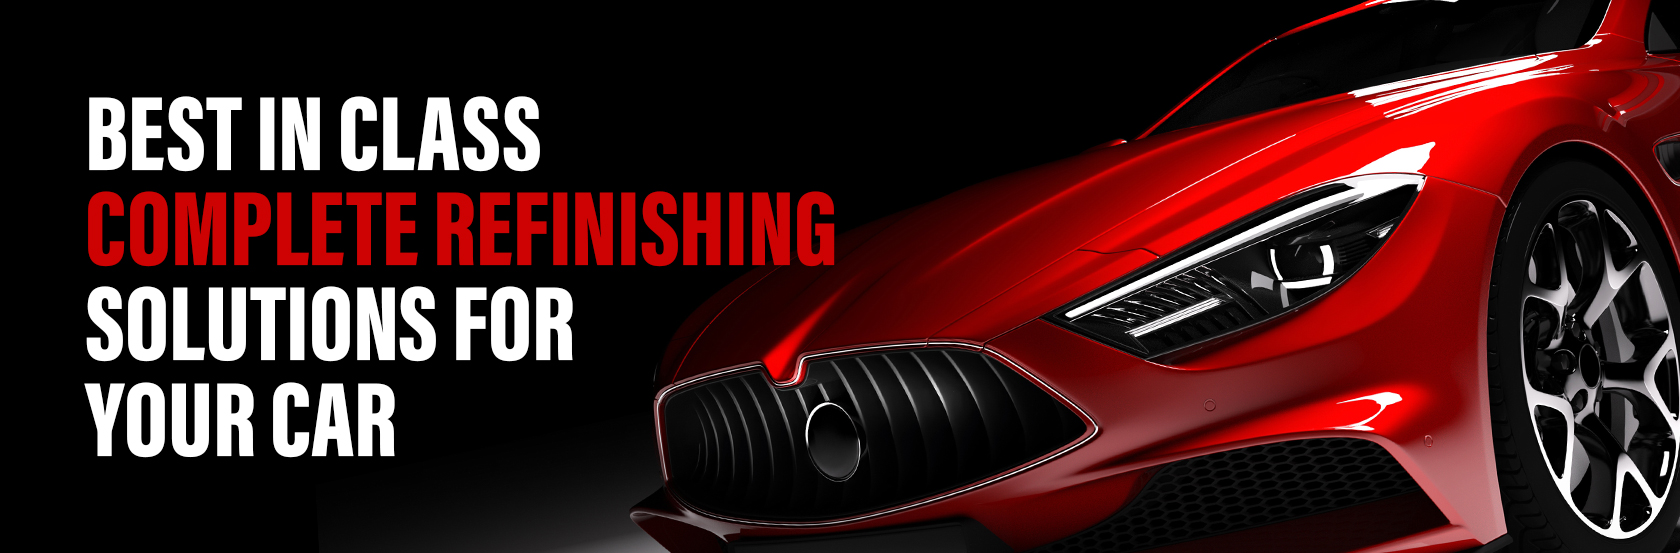 Auto Refinishing Solutions Banner